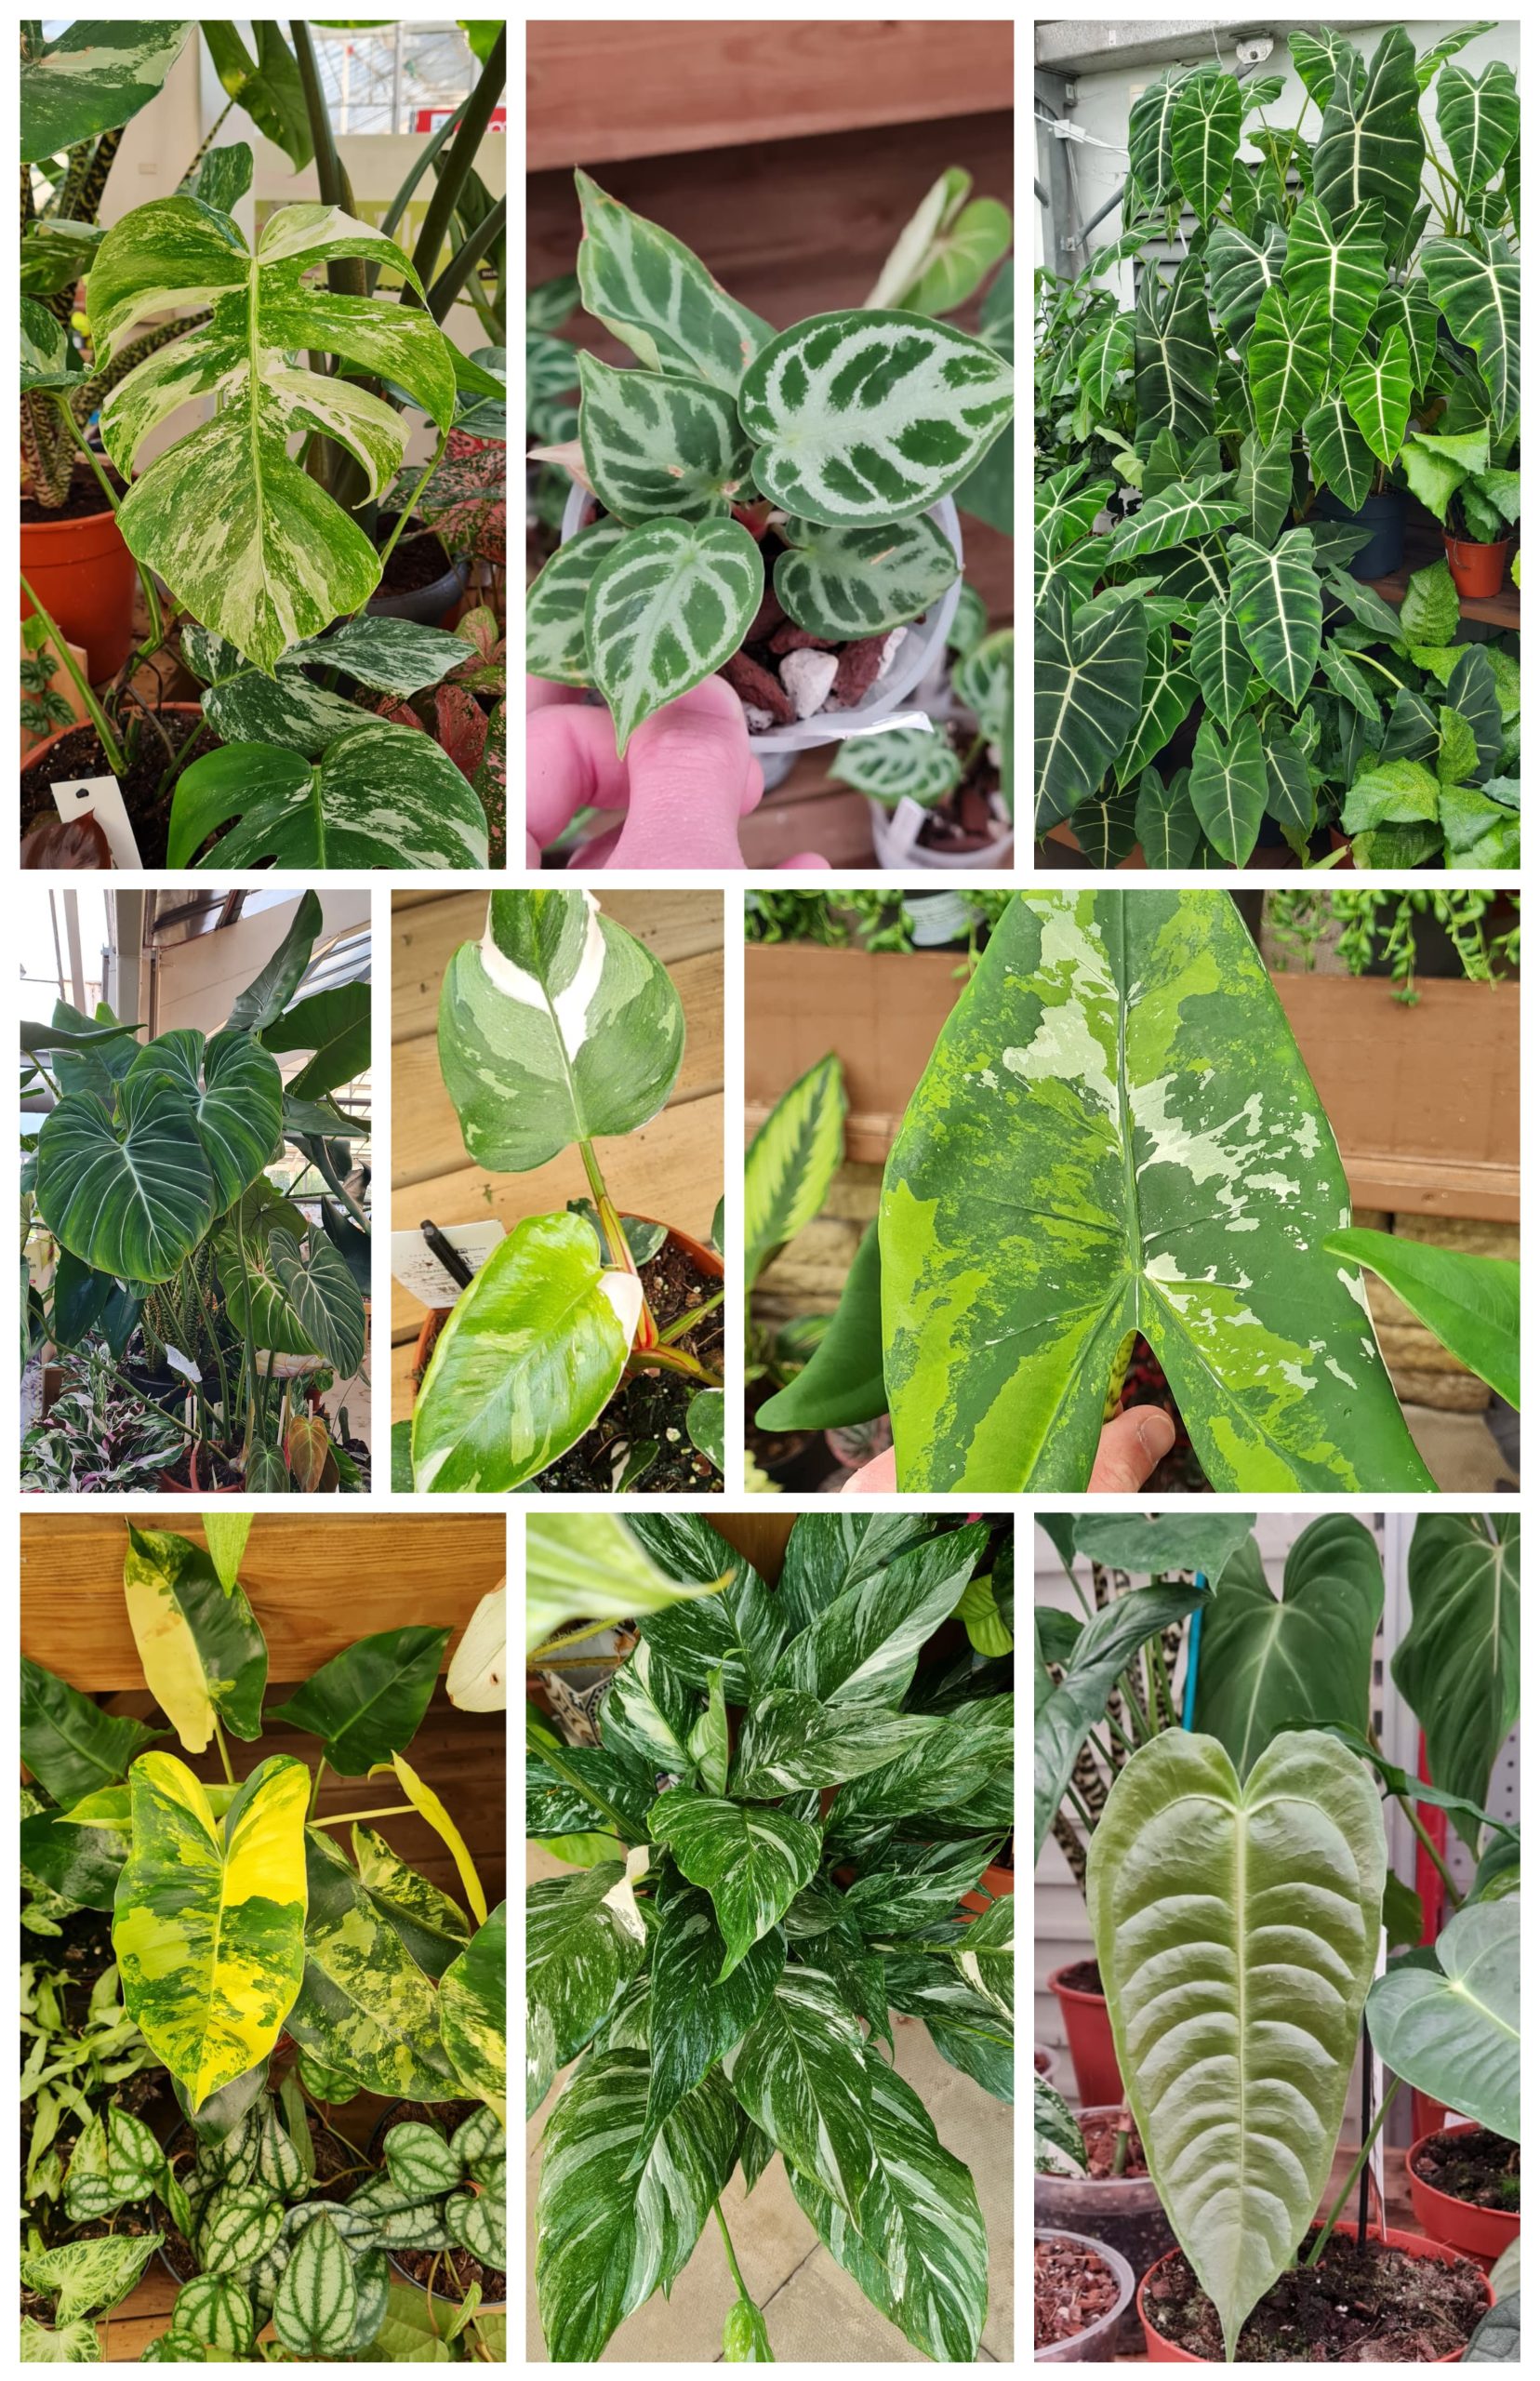 House Plants for Sale at Dean's Garden Centre in York